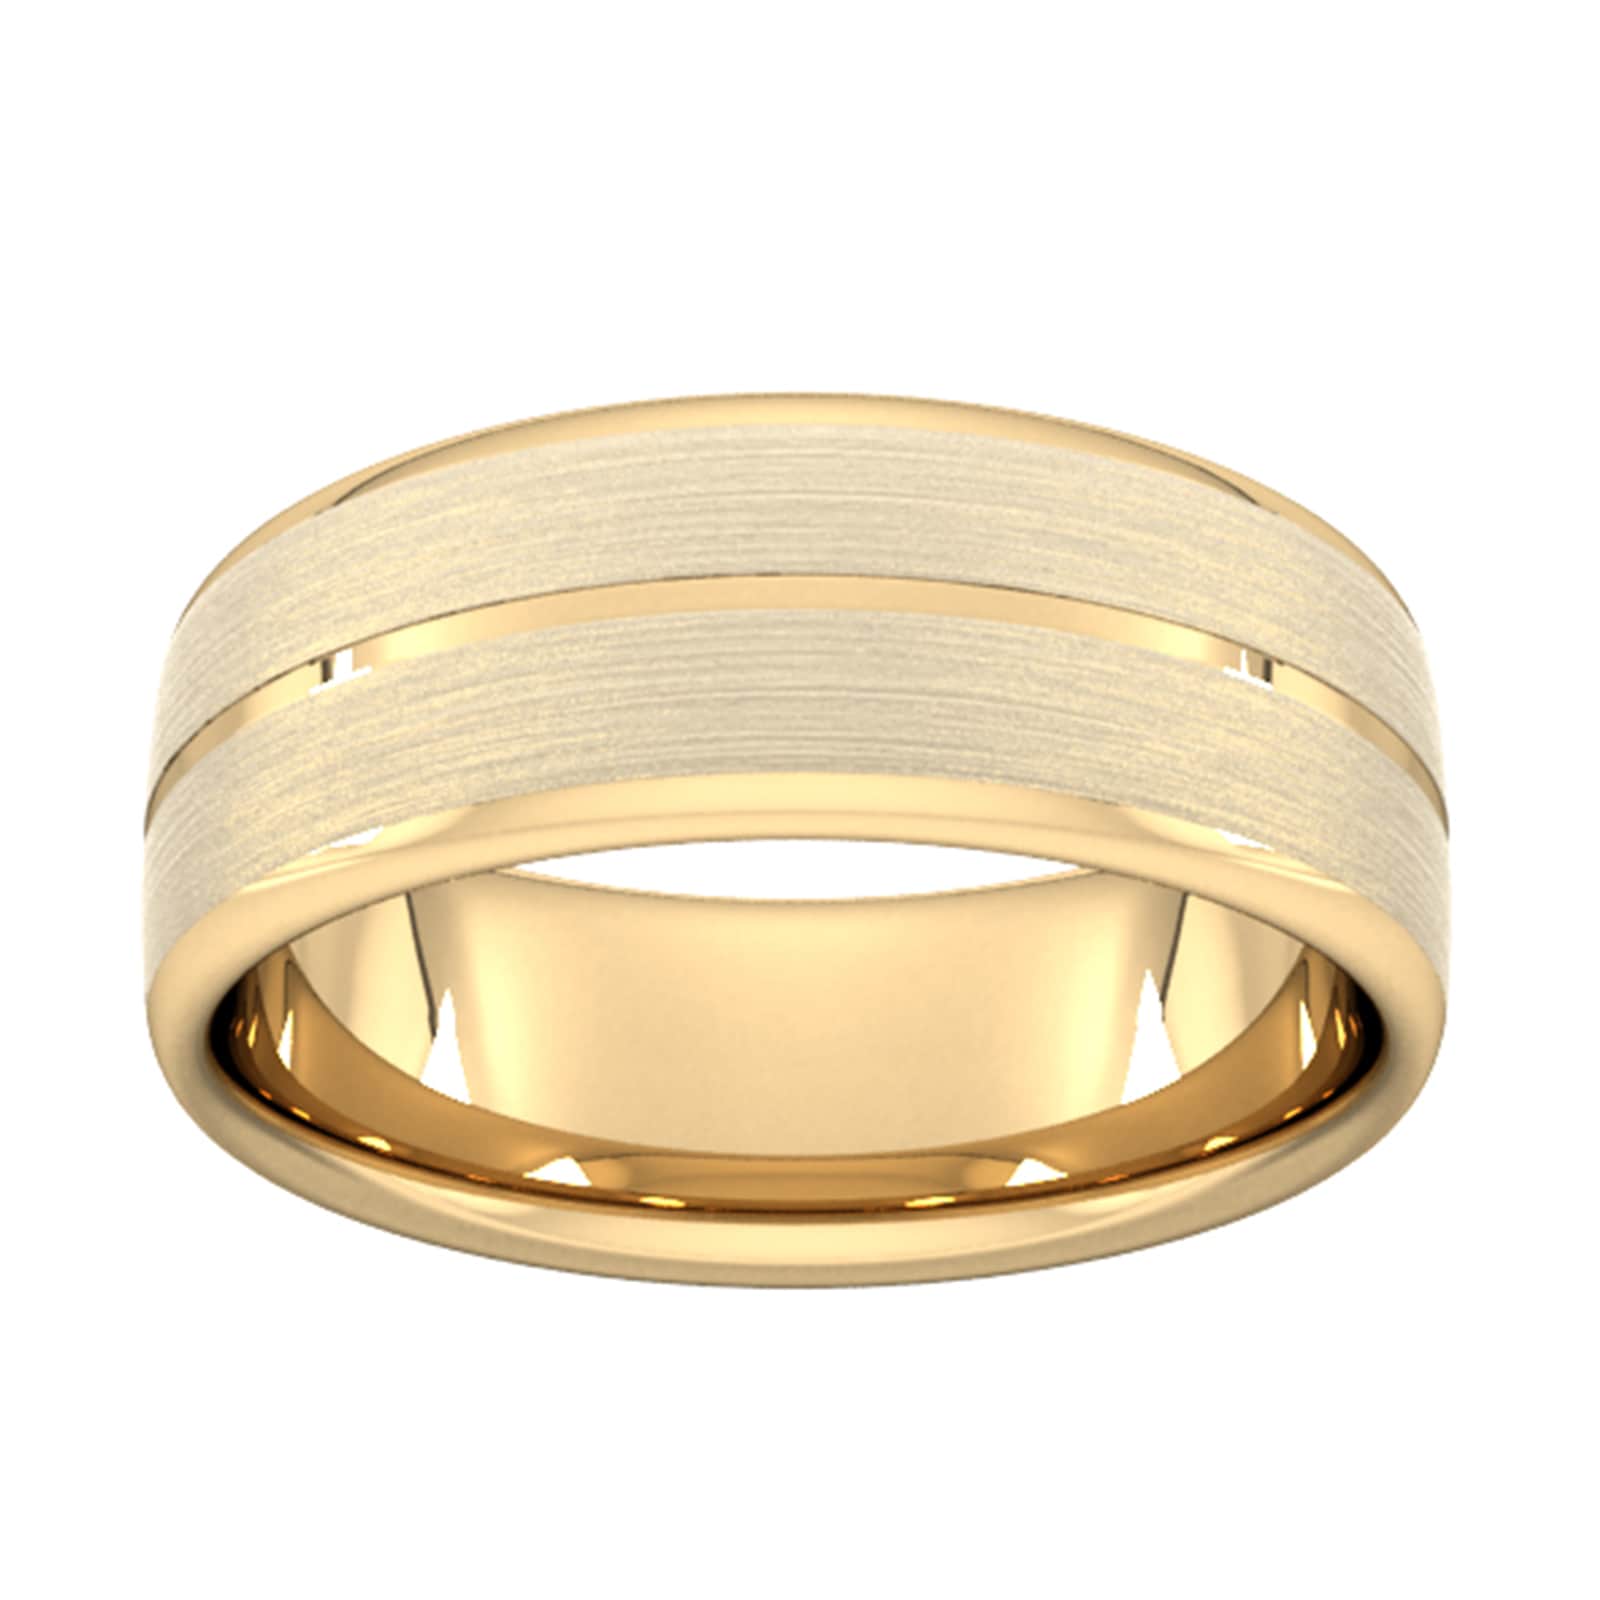 8mm D Shape Heavy Centre Groove With Chamfered Edge Wedding Ring In 18 Carat Yellow Gold - Ring Size V